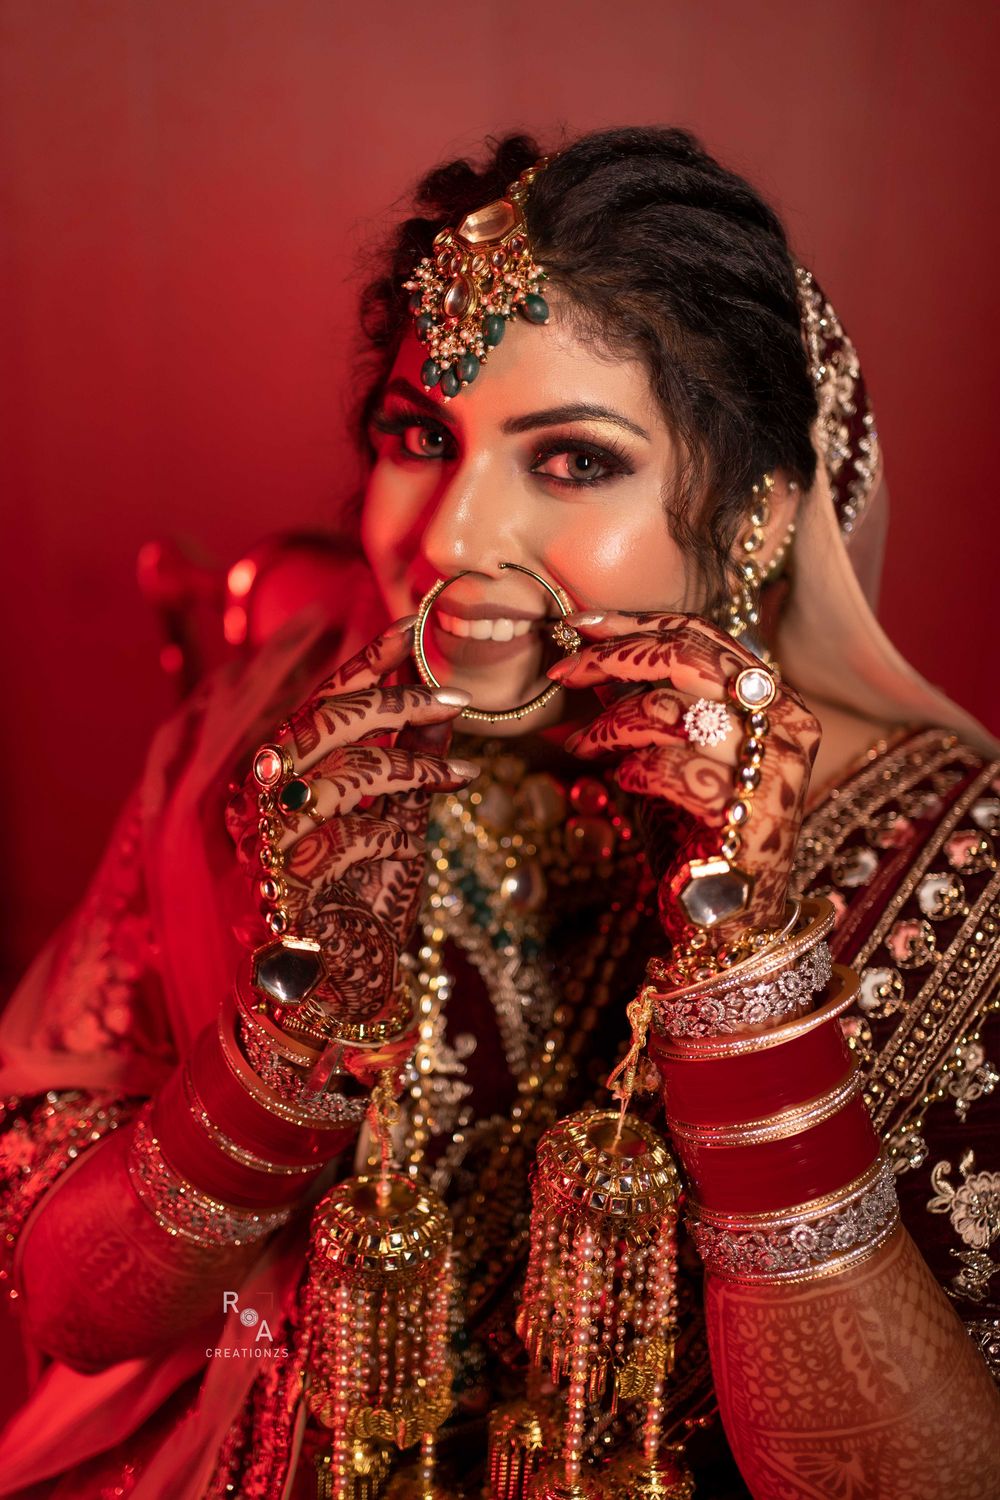 Photo From Jatin & Poonam - By RA Creationz